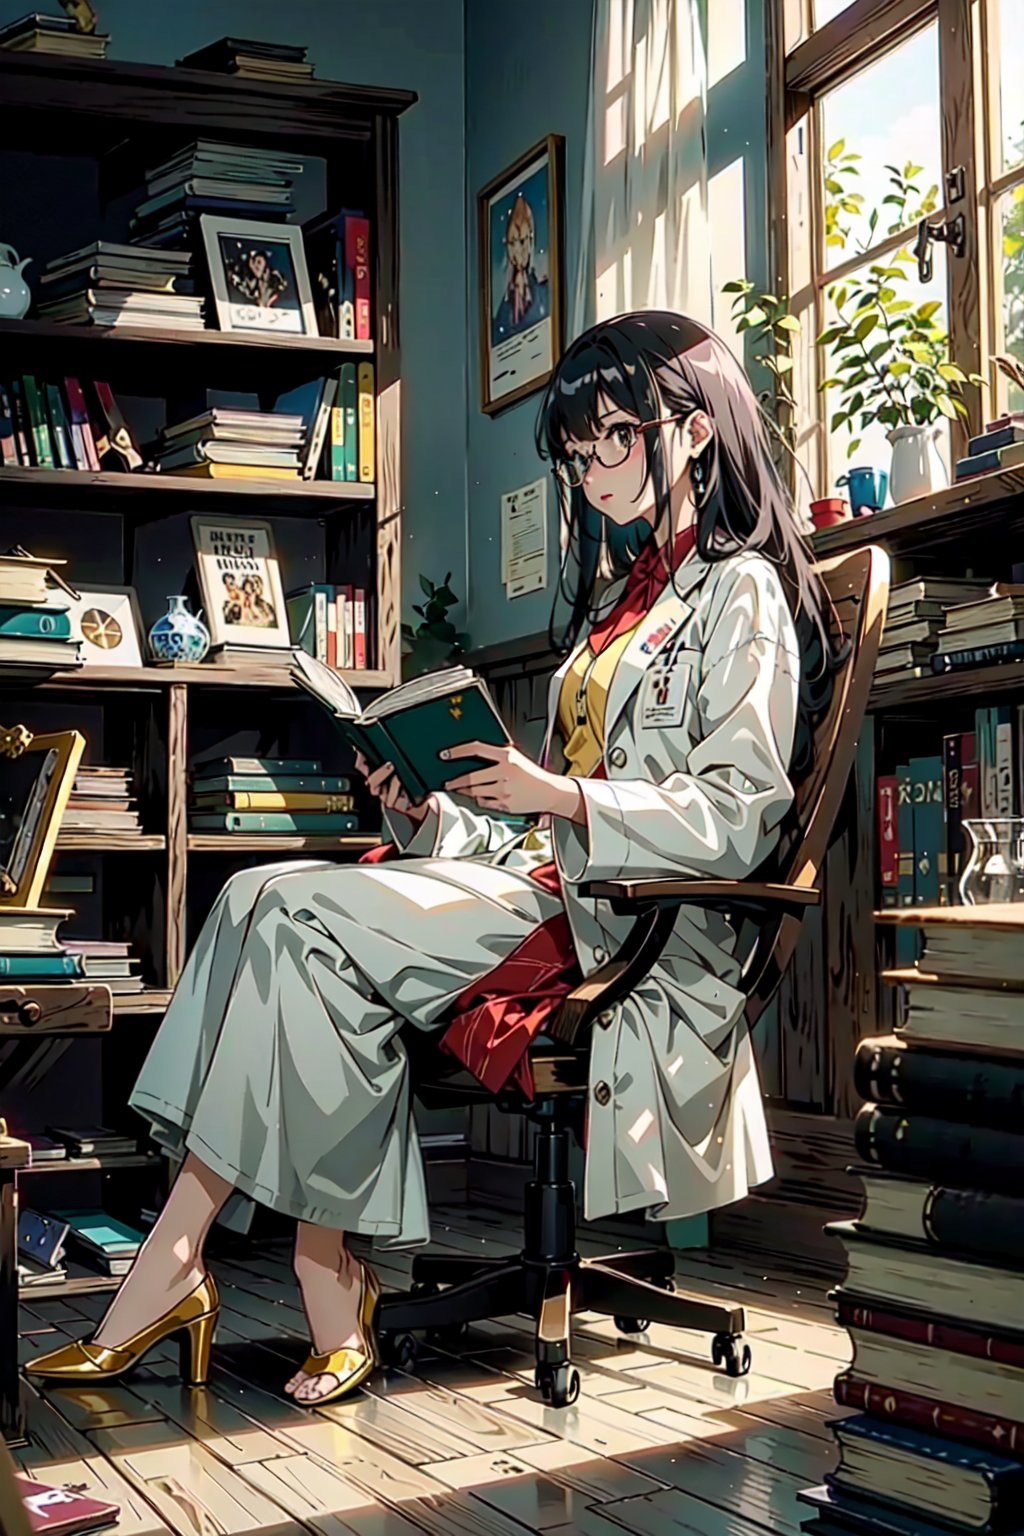 1female, cinematic lighting, movie angle shot, beautiful women researcher sit on chair reading a book, a lot of book on background, sunlight, stack of books, white lab coat, anime style, she focused on reading, messy room, , wooden chir, wooden_floor, wooden room ,perfecteyes, glasses, reading book, focus, long beautiful hair